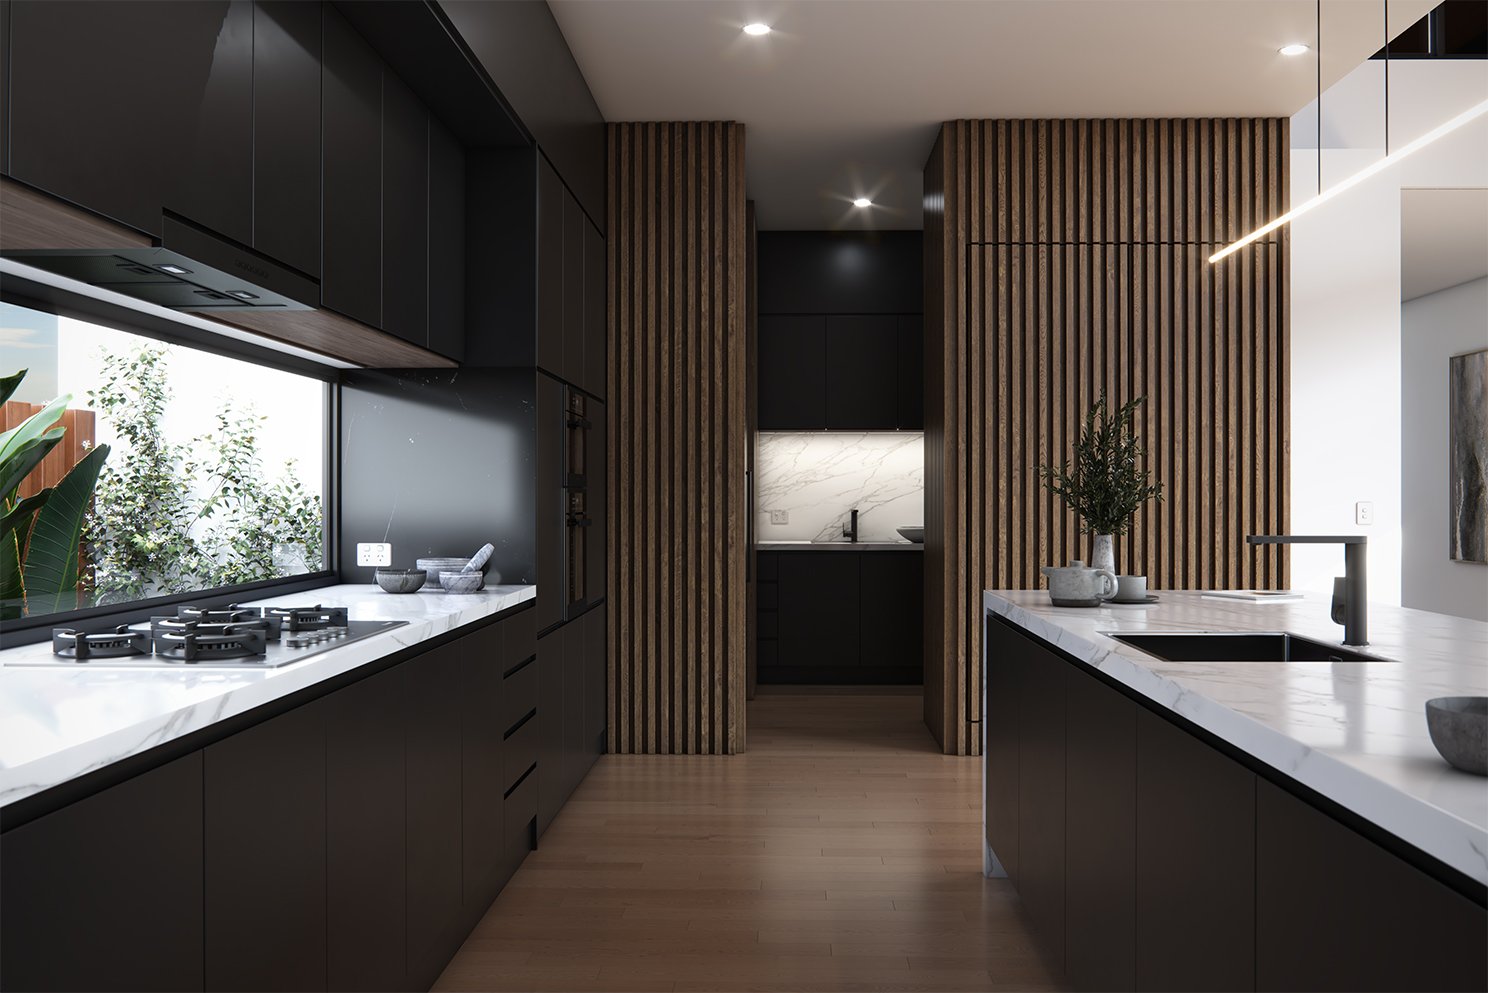 Modern kitchen design with timber feature and black cabinetry, Rye Victoria, Barnes Matina